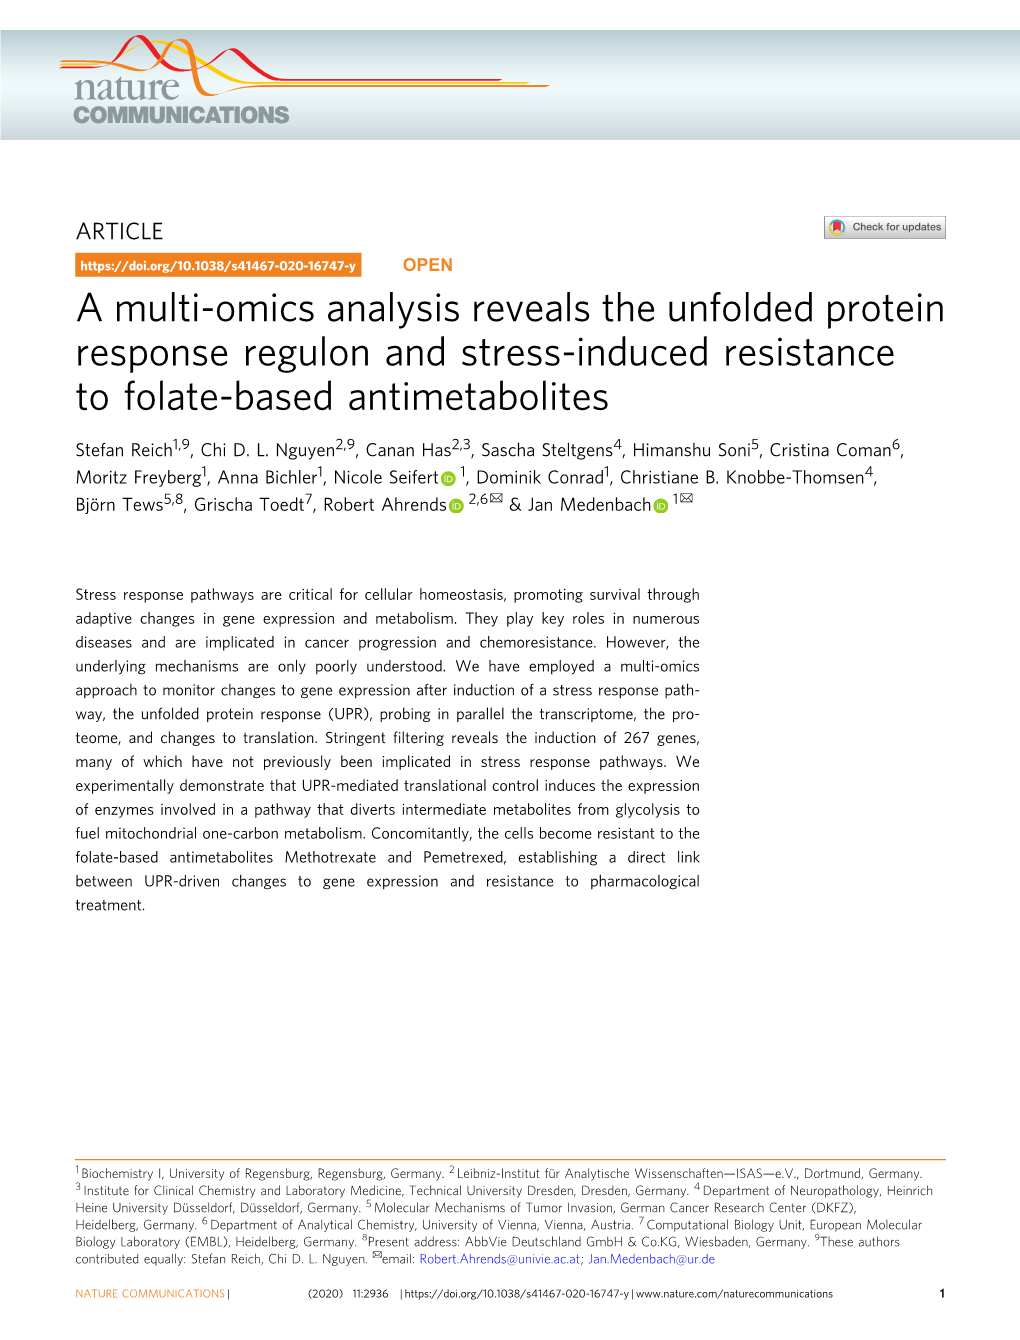 A Multi-Omics Analysis Reveals the Unfolded Protein Response Regulon and Stress-Induced Resistance to Folate-Based Antimetabolites